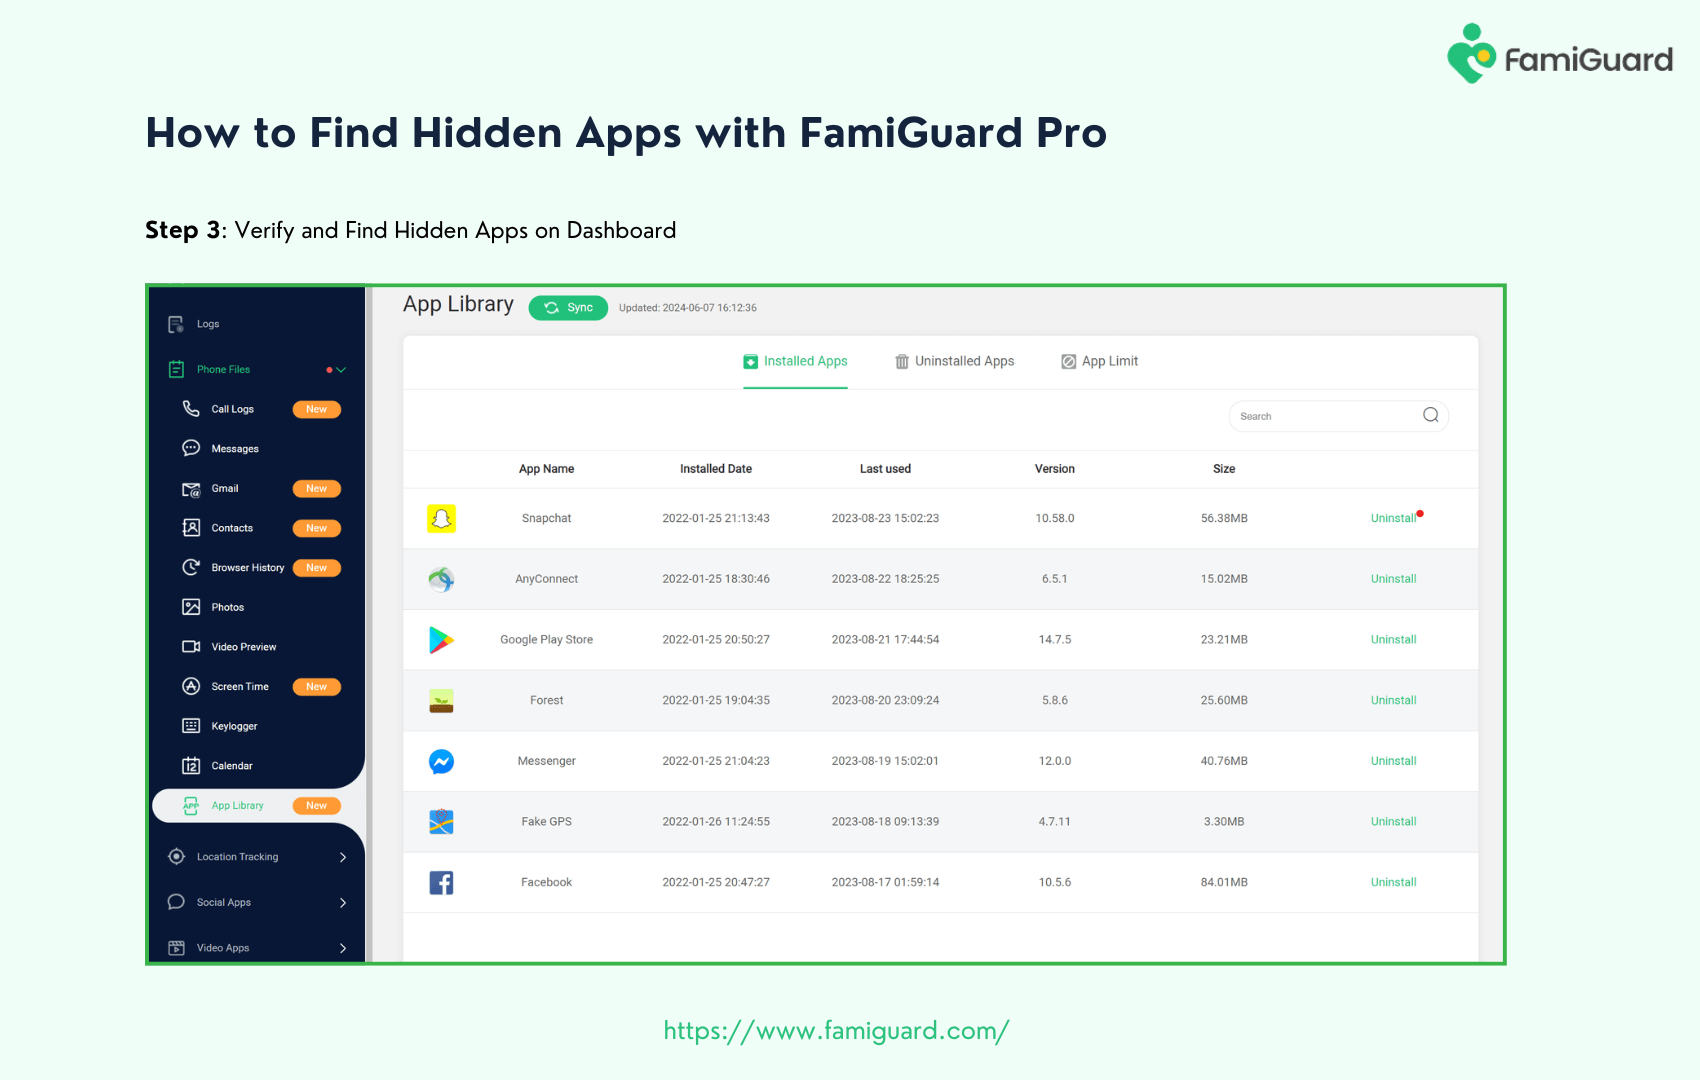 How to Find Hidden Apps with FamiGuard Pro